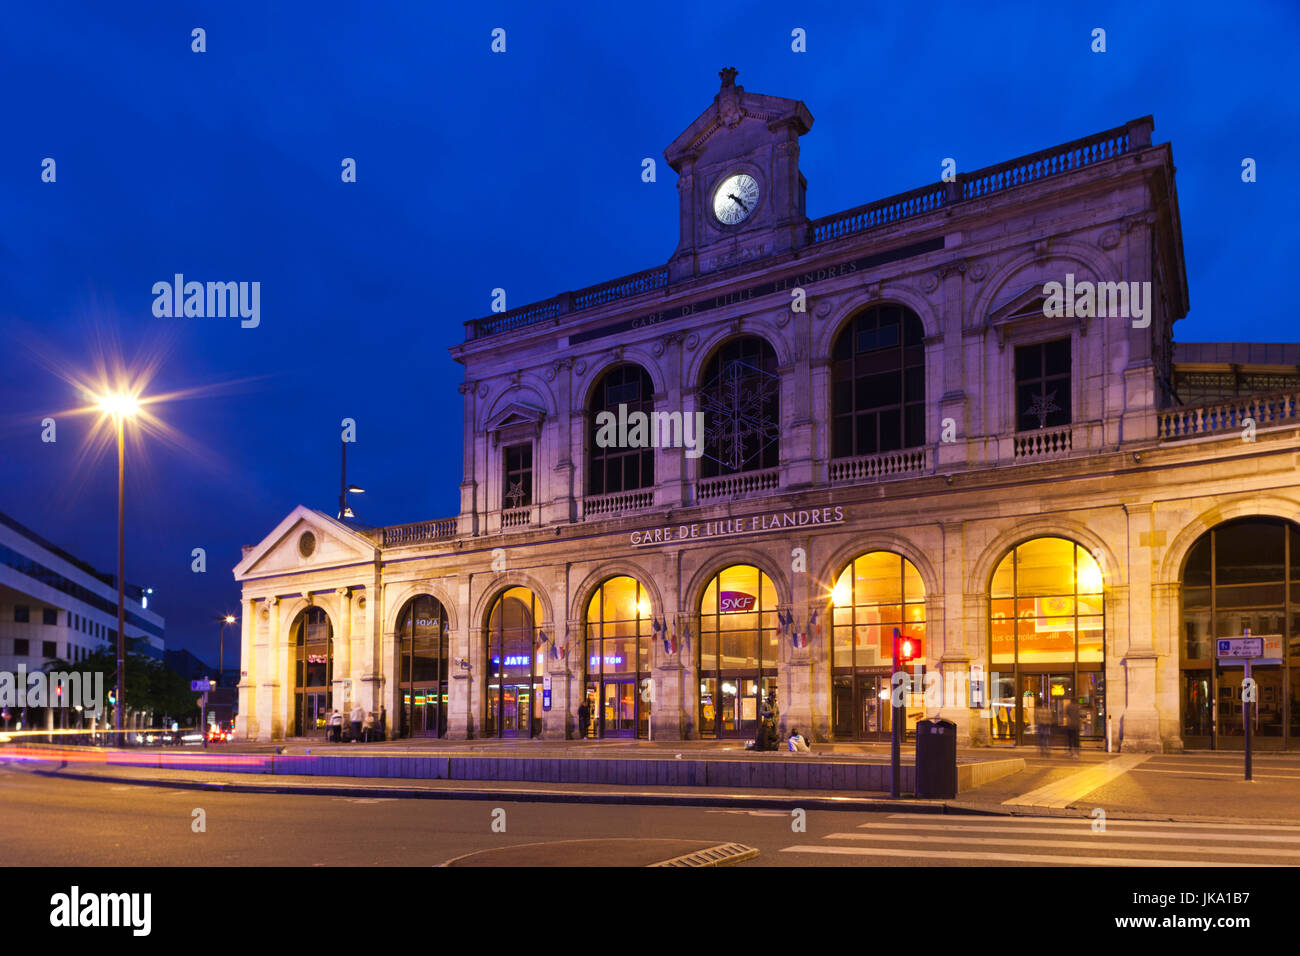 France, Nord-Pas de Calais Region, Nord Department, French Flanders Area, Lille,  Gare Lille-Flandres train station, dusk Stock Photo